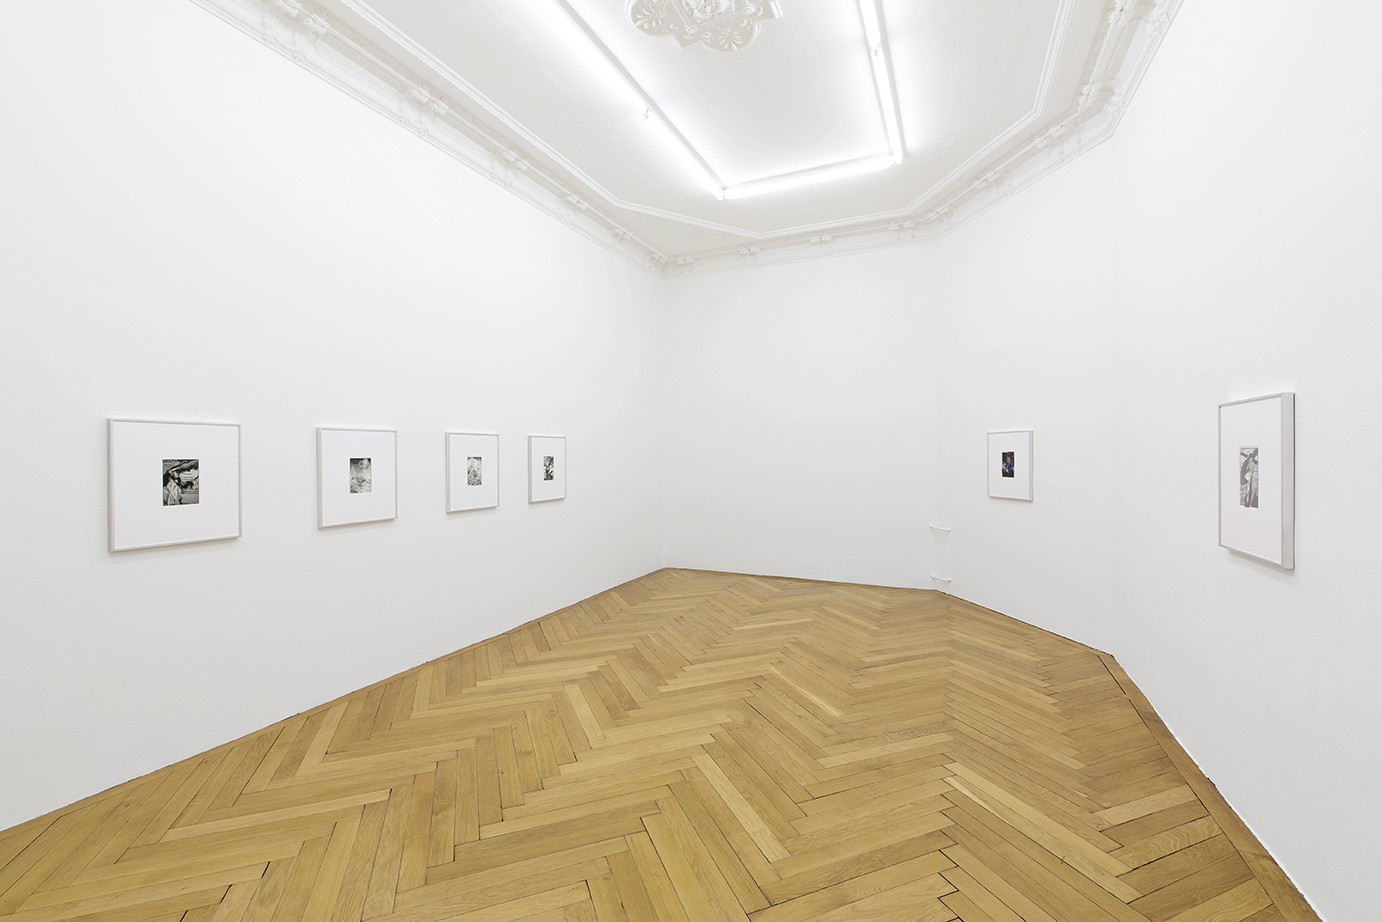 Installation view, A Simulated Future amid Collapse, Société, 2015